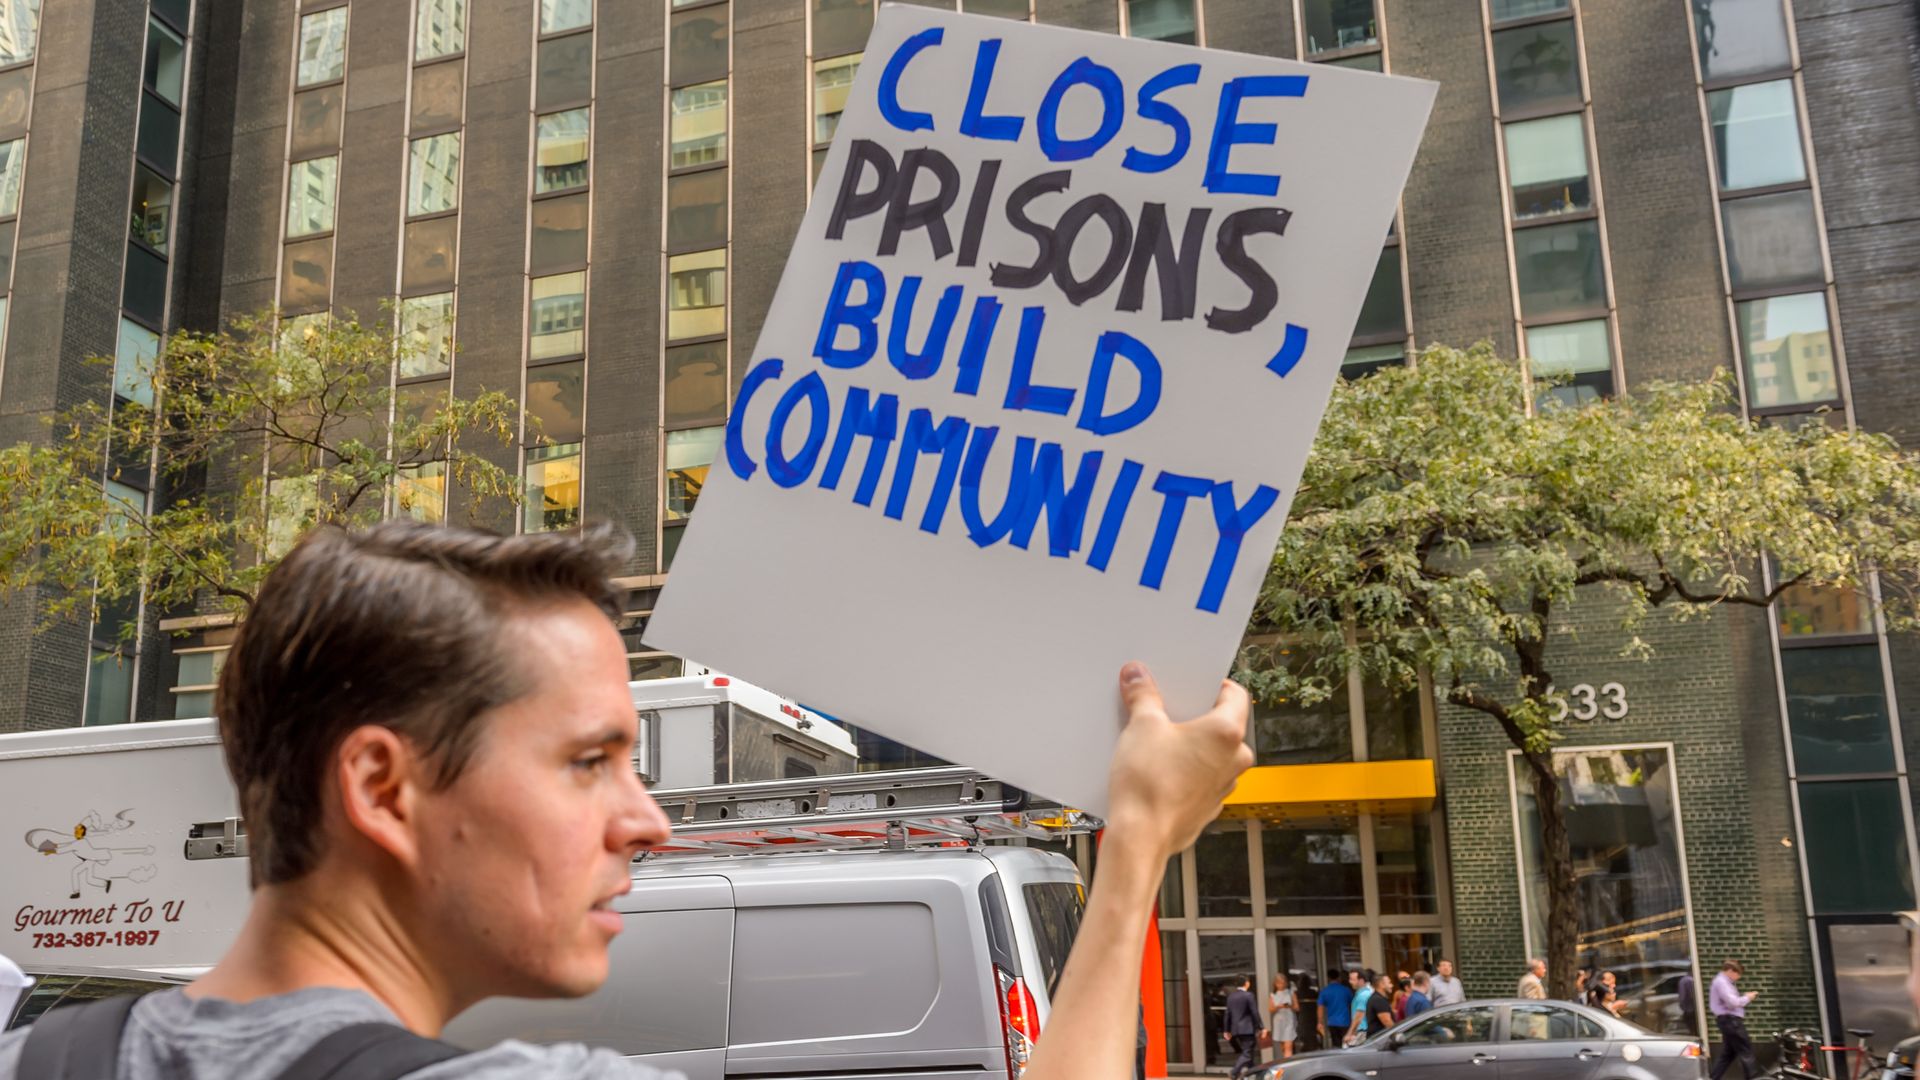 Photo of a person holding a sign that says "Close prisons, build community"